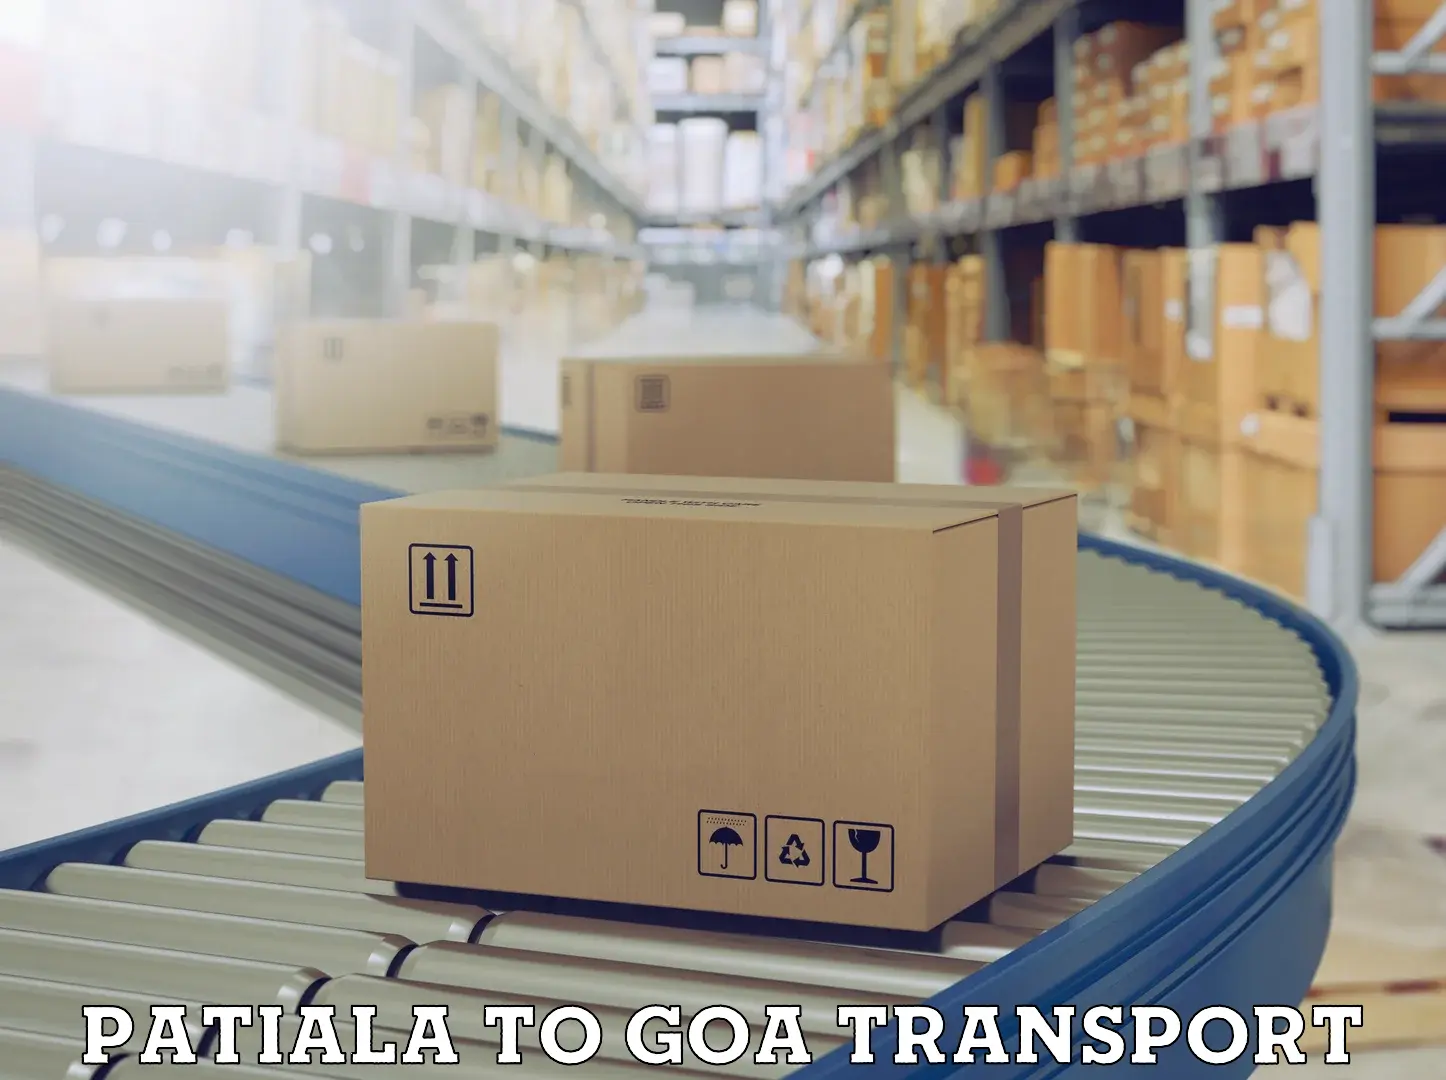 Container transport service Patiala to Goa University